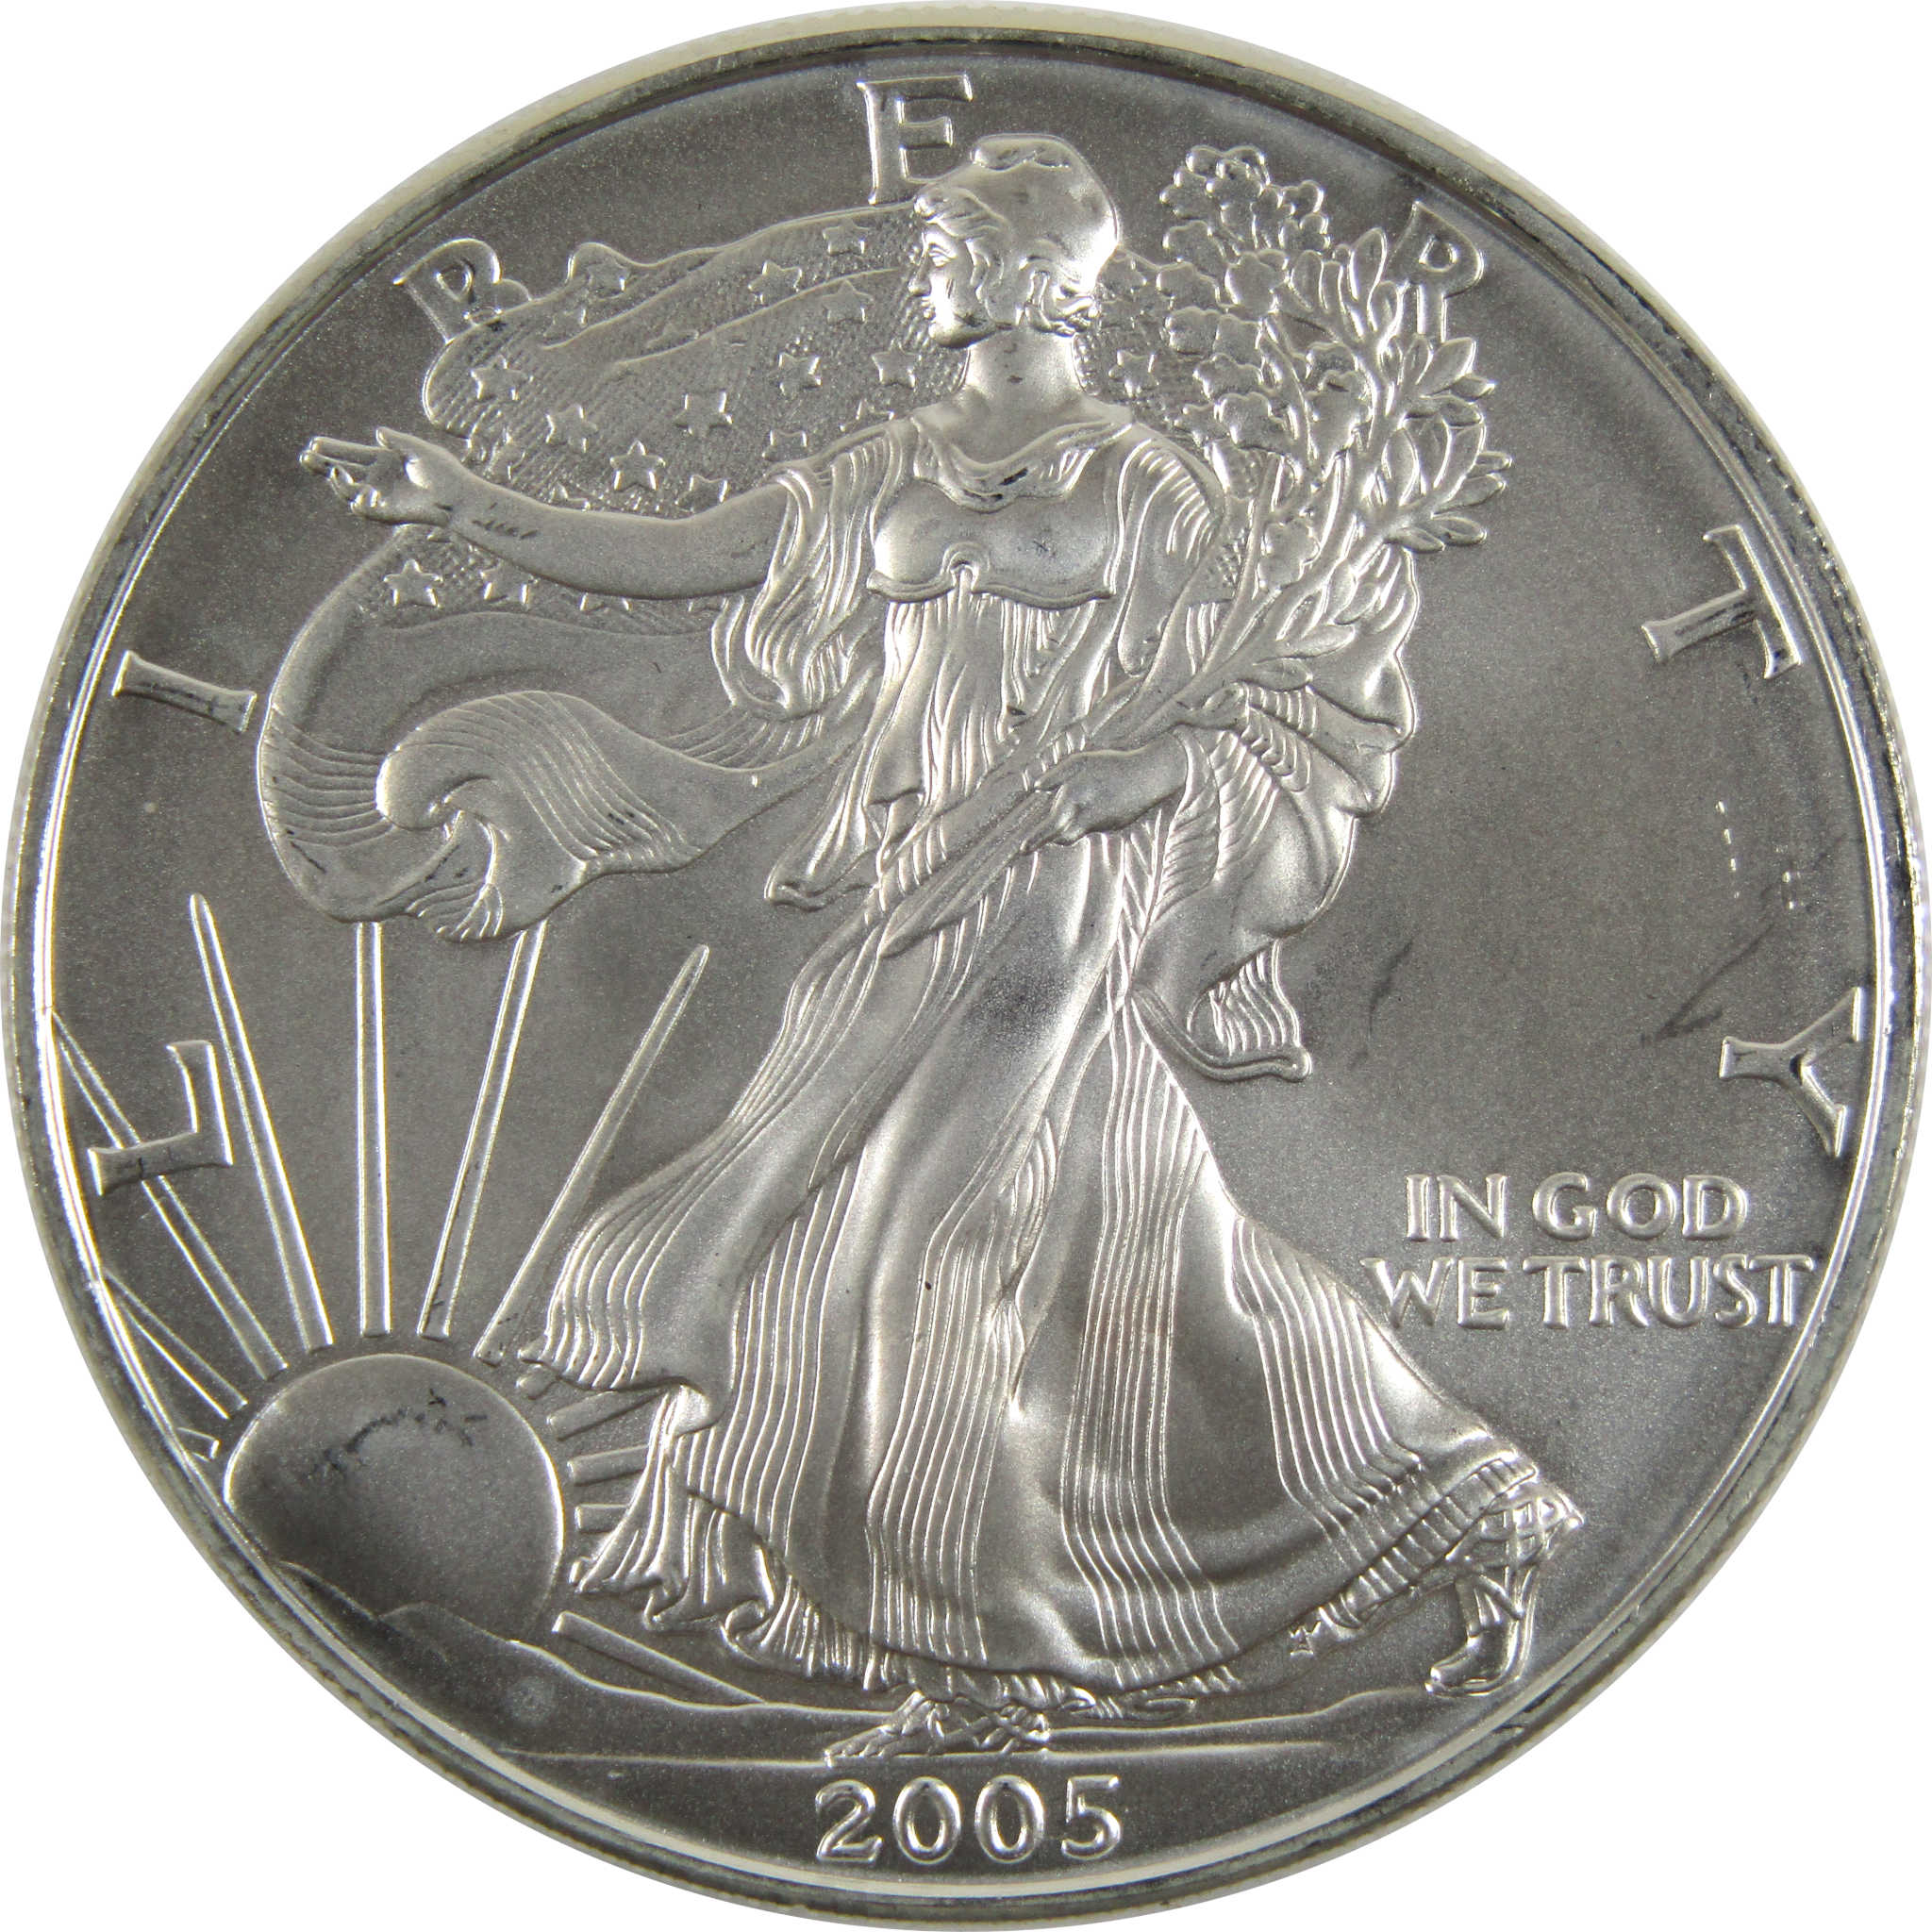 Invest in Bullion Coins | Profile Coins & Collectibles